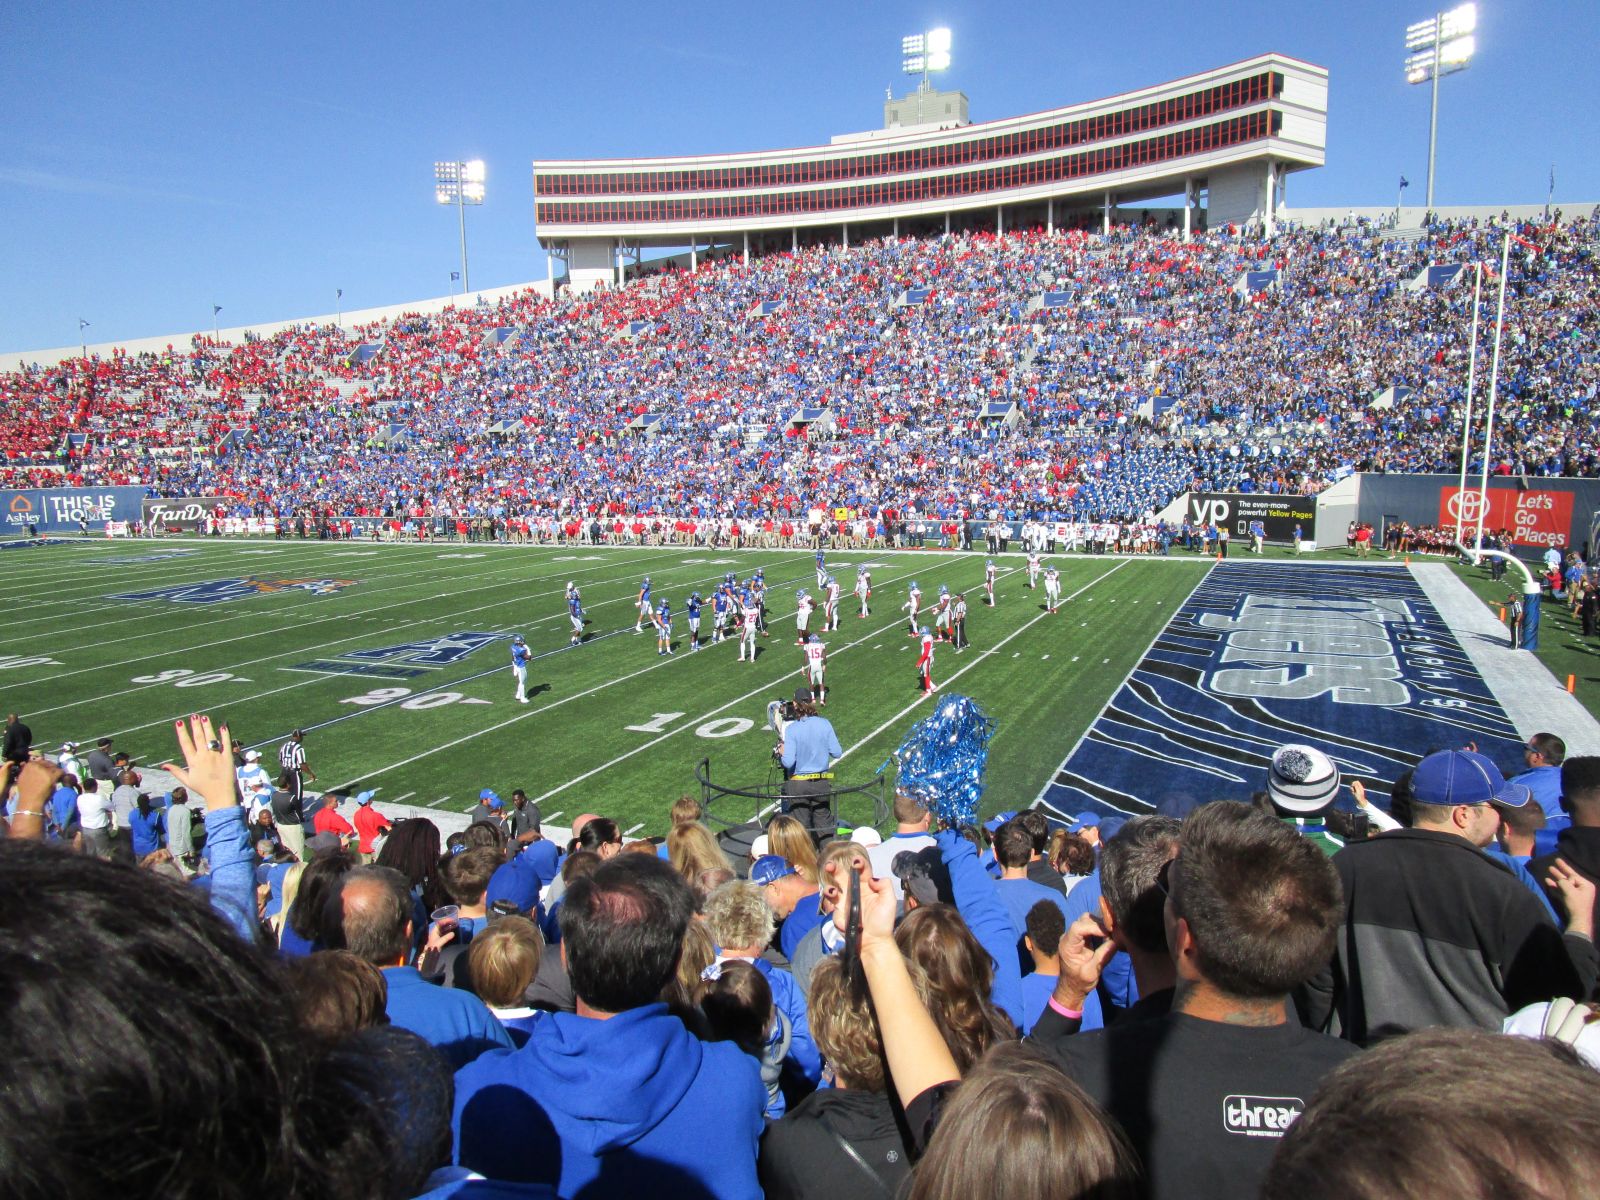 Liberty Bowl Seating Chart With Rows